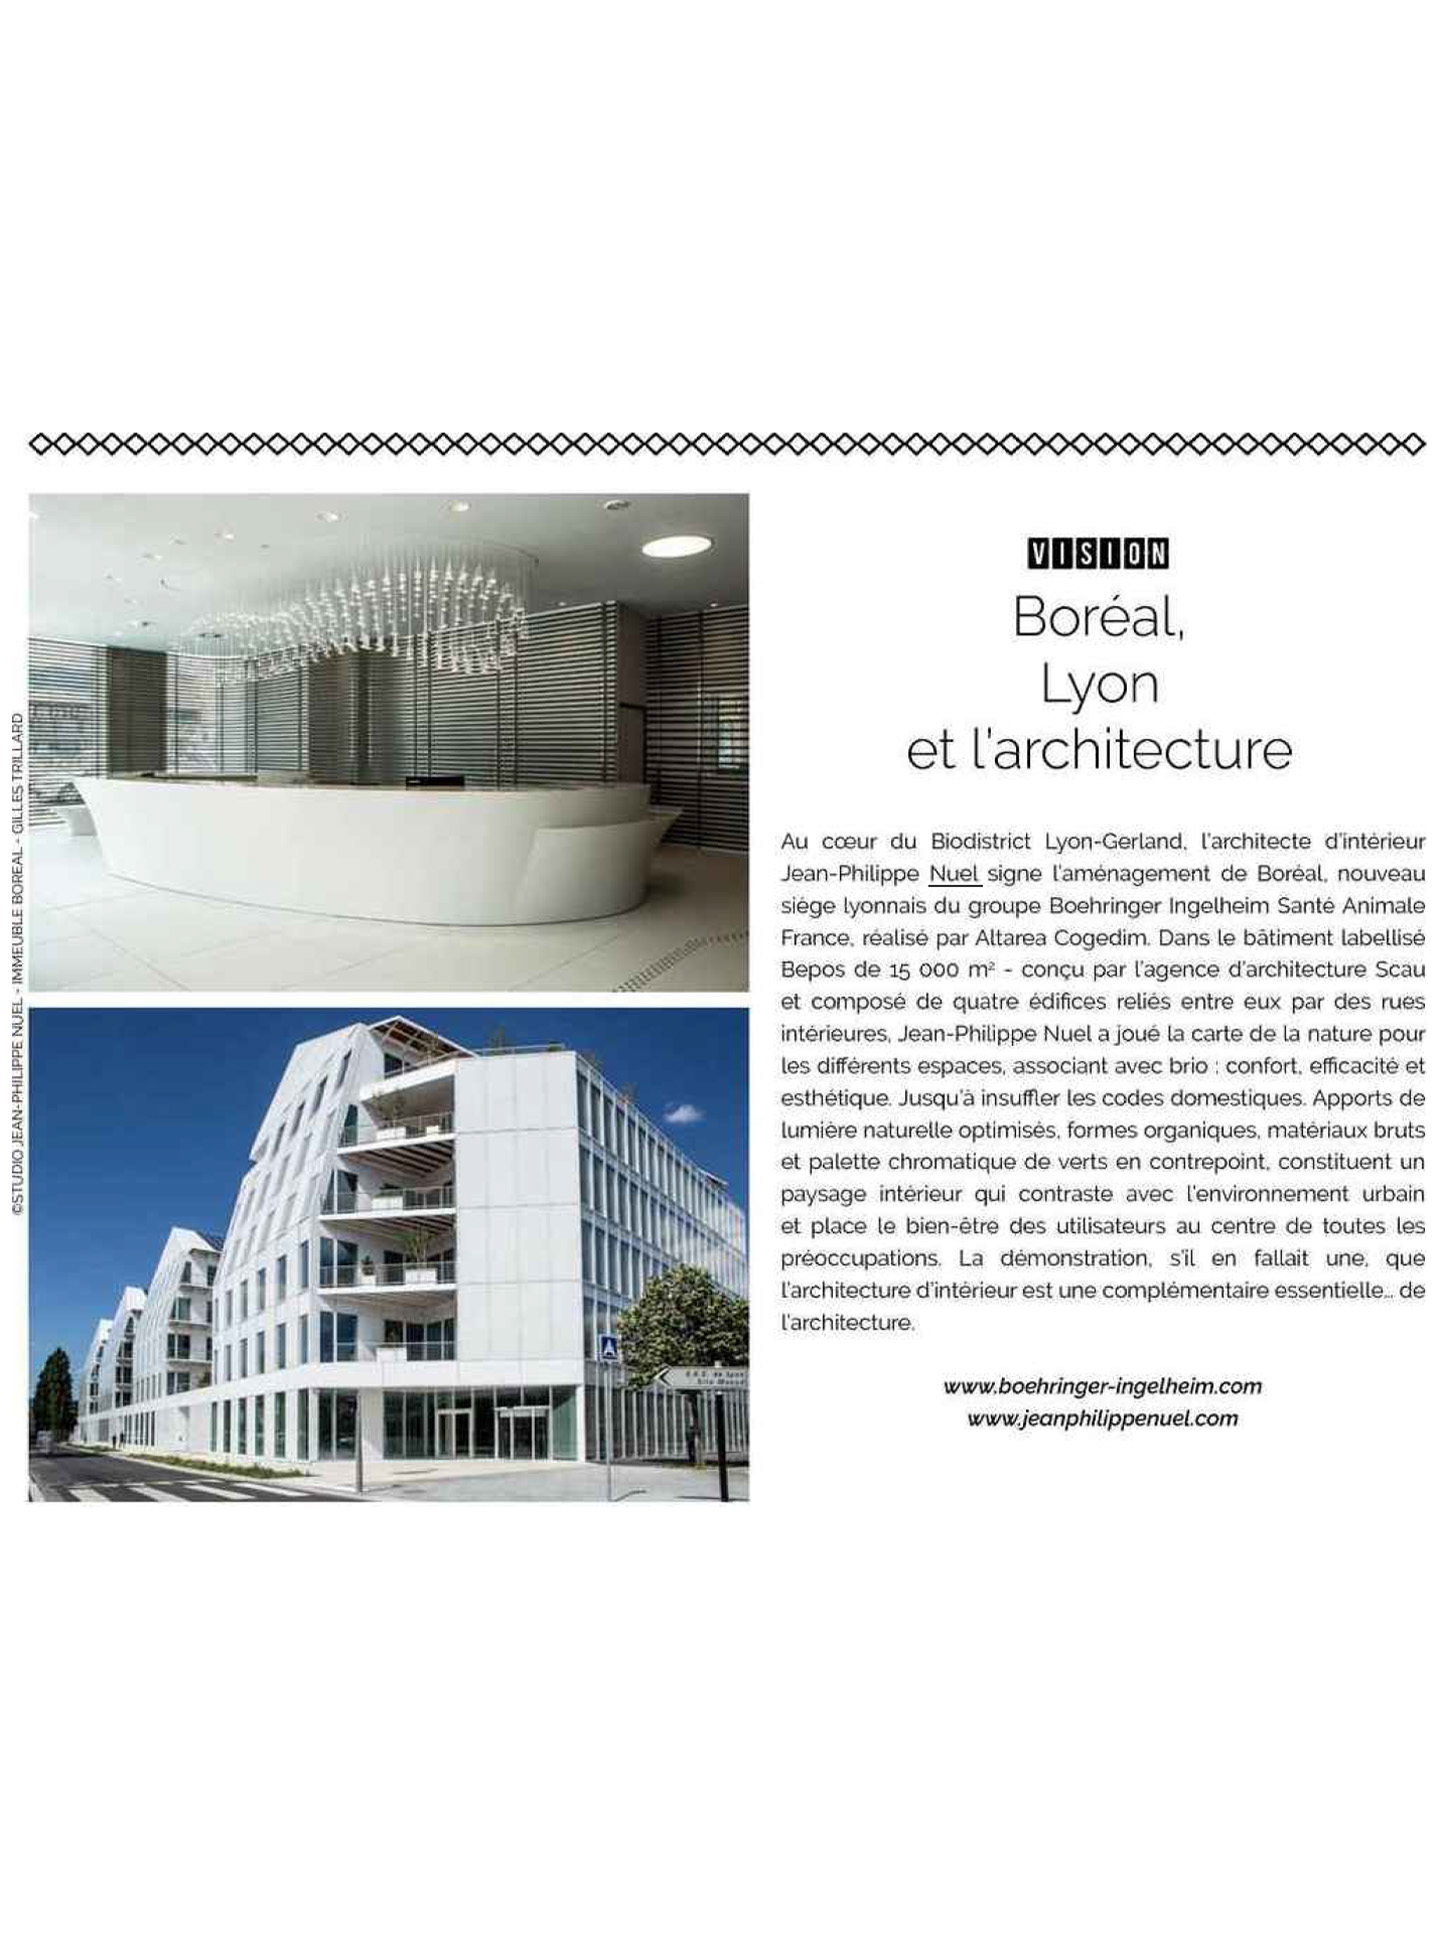 article on the boréal building in lyon, tertiary building in the magazine Domodéco, realized by the interior design studio jean-philippe nuel